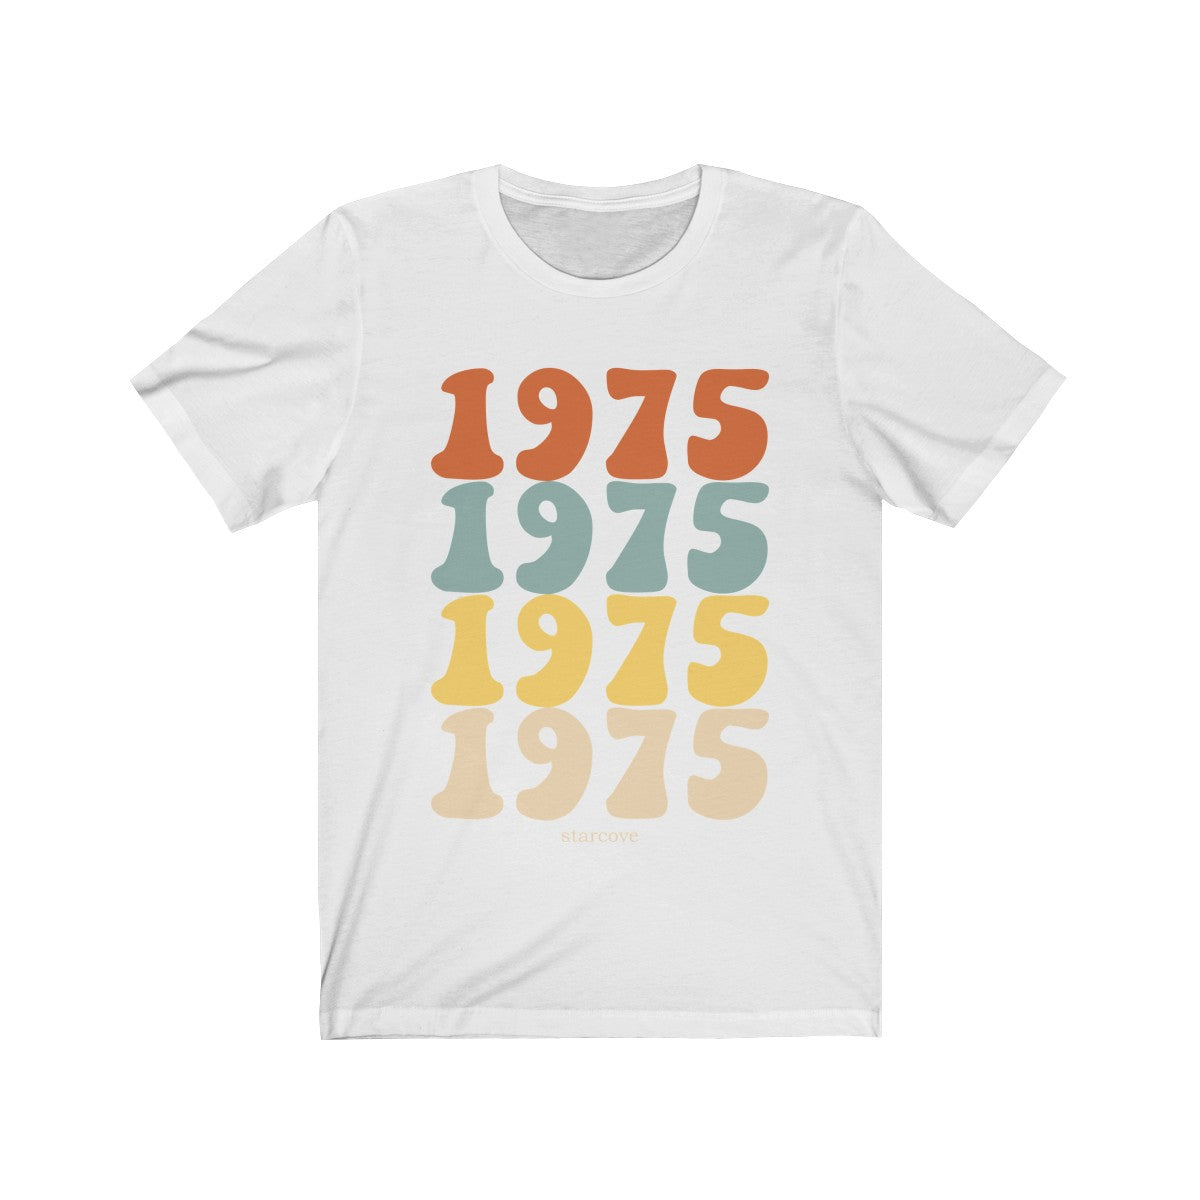 1975 shirt, 46th Birthday Party Turning 46 Years Old, 70s Retro Vintage gift Idea Women Men, Born Made in 1975 Funny Mom Dad Present TShirt Starcove Fashion